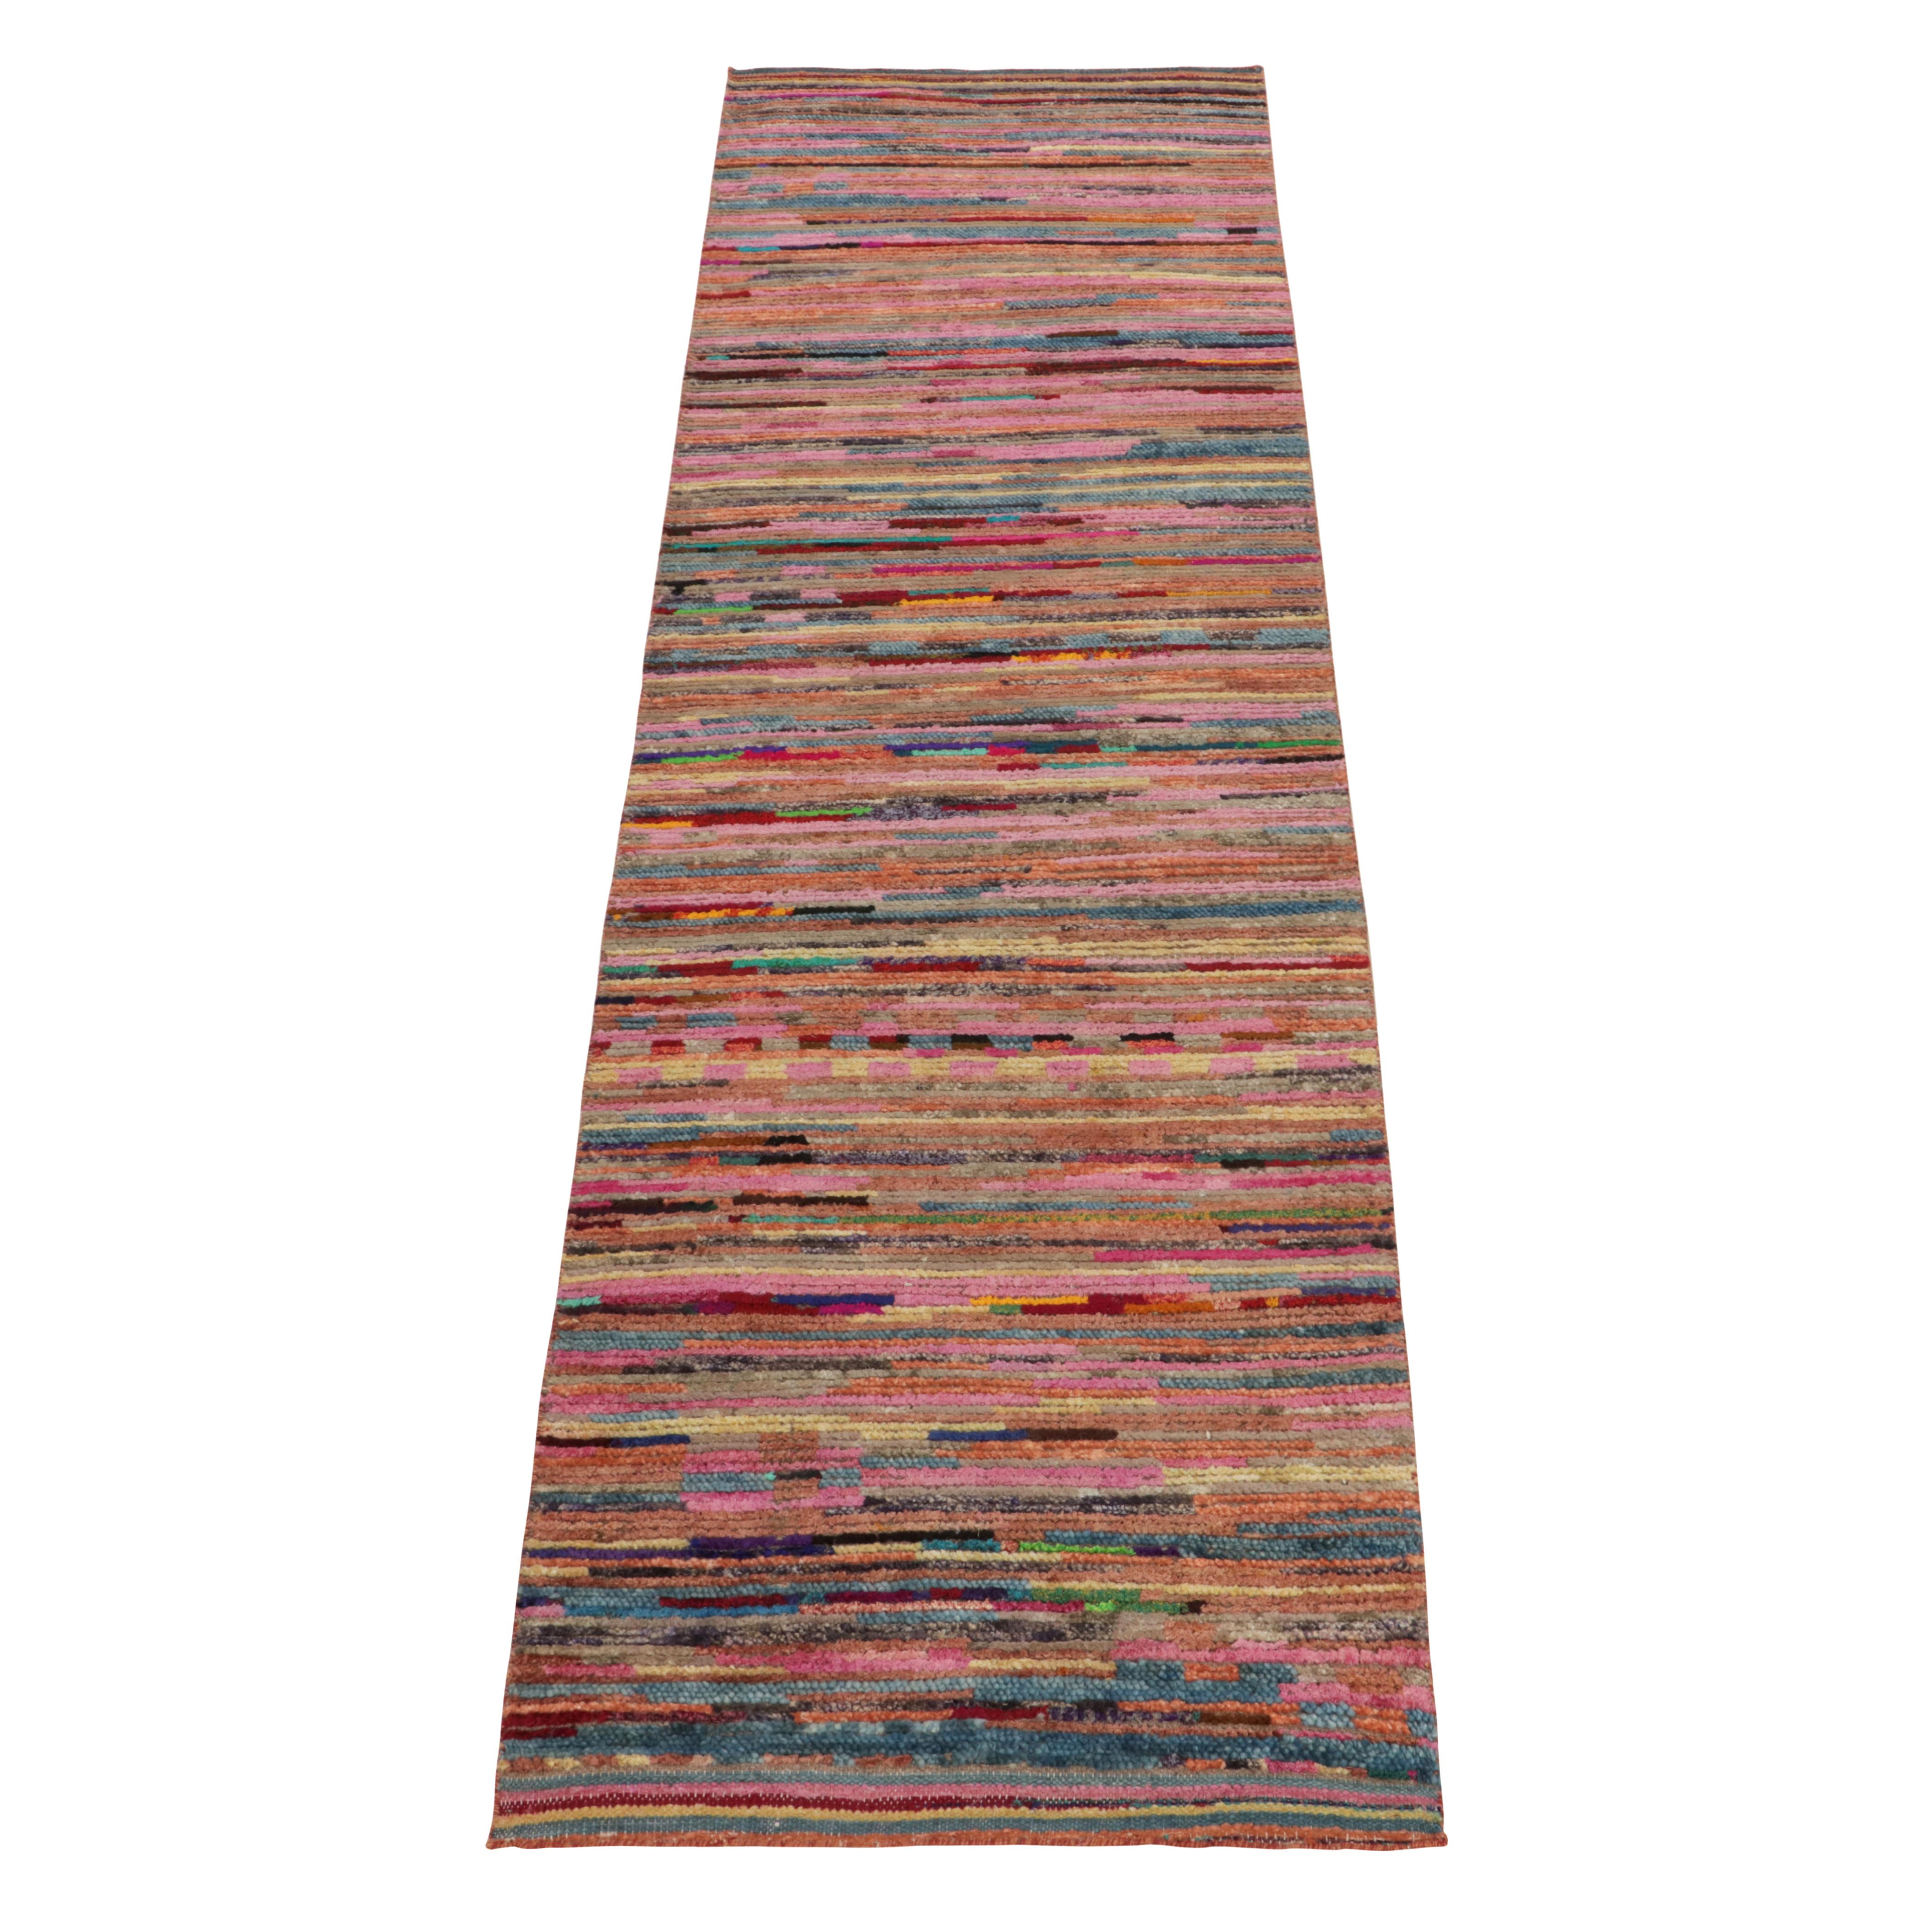 From our contemporary reimagining of Moroccan tribal rugs, a 3x10 runner in hand-knotted silk enjoying an outstanding polychromatic colorway. The pink undertone enjoys striations in a spectrum of colors with a playful sense of movement, uniquely